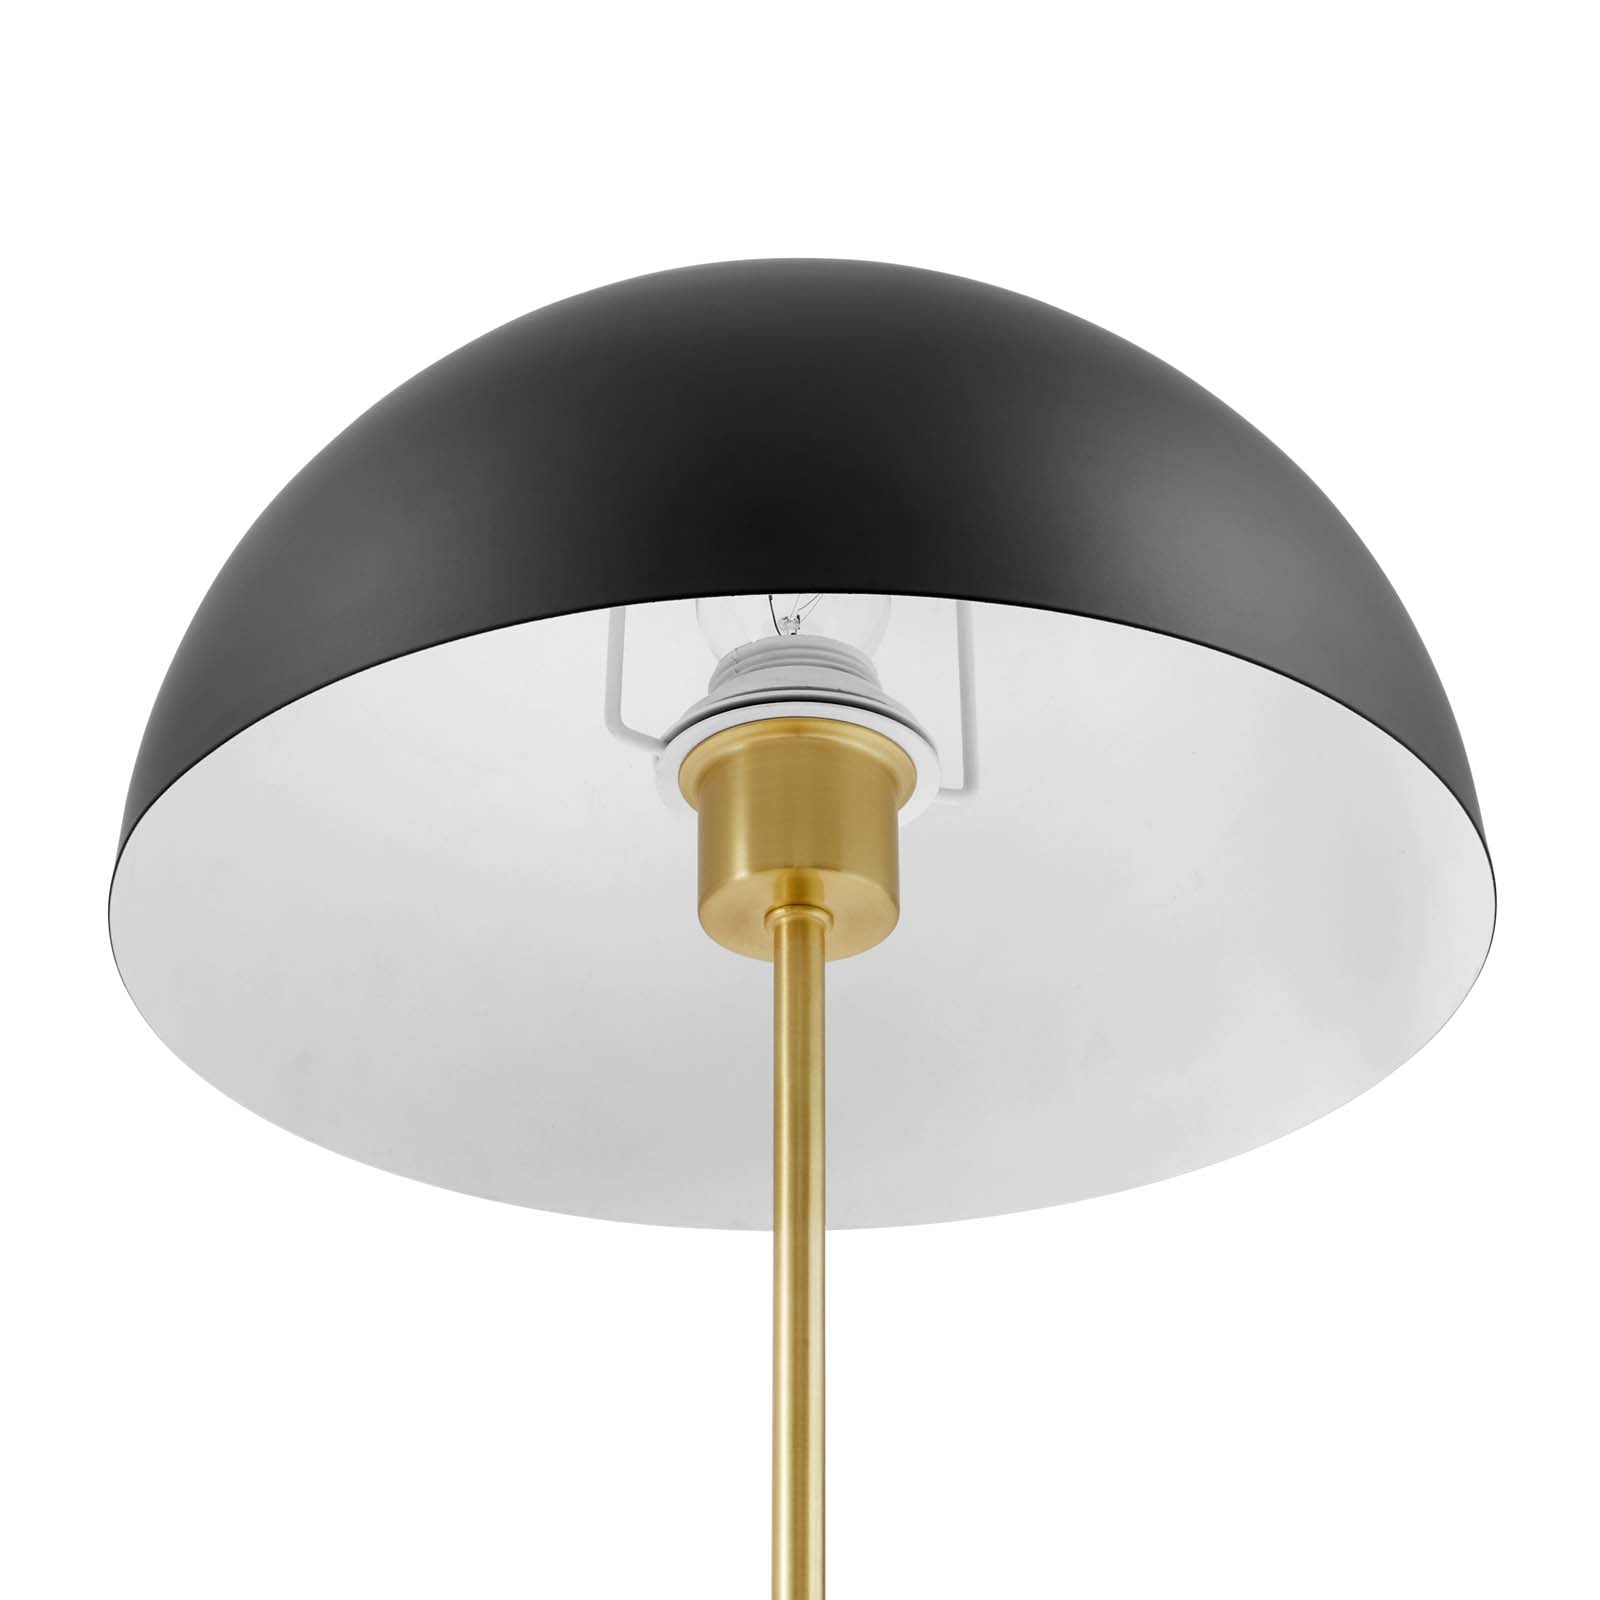 Modway Table Lamps - Ideal Metal Table Lamp Black Satin Brass